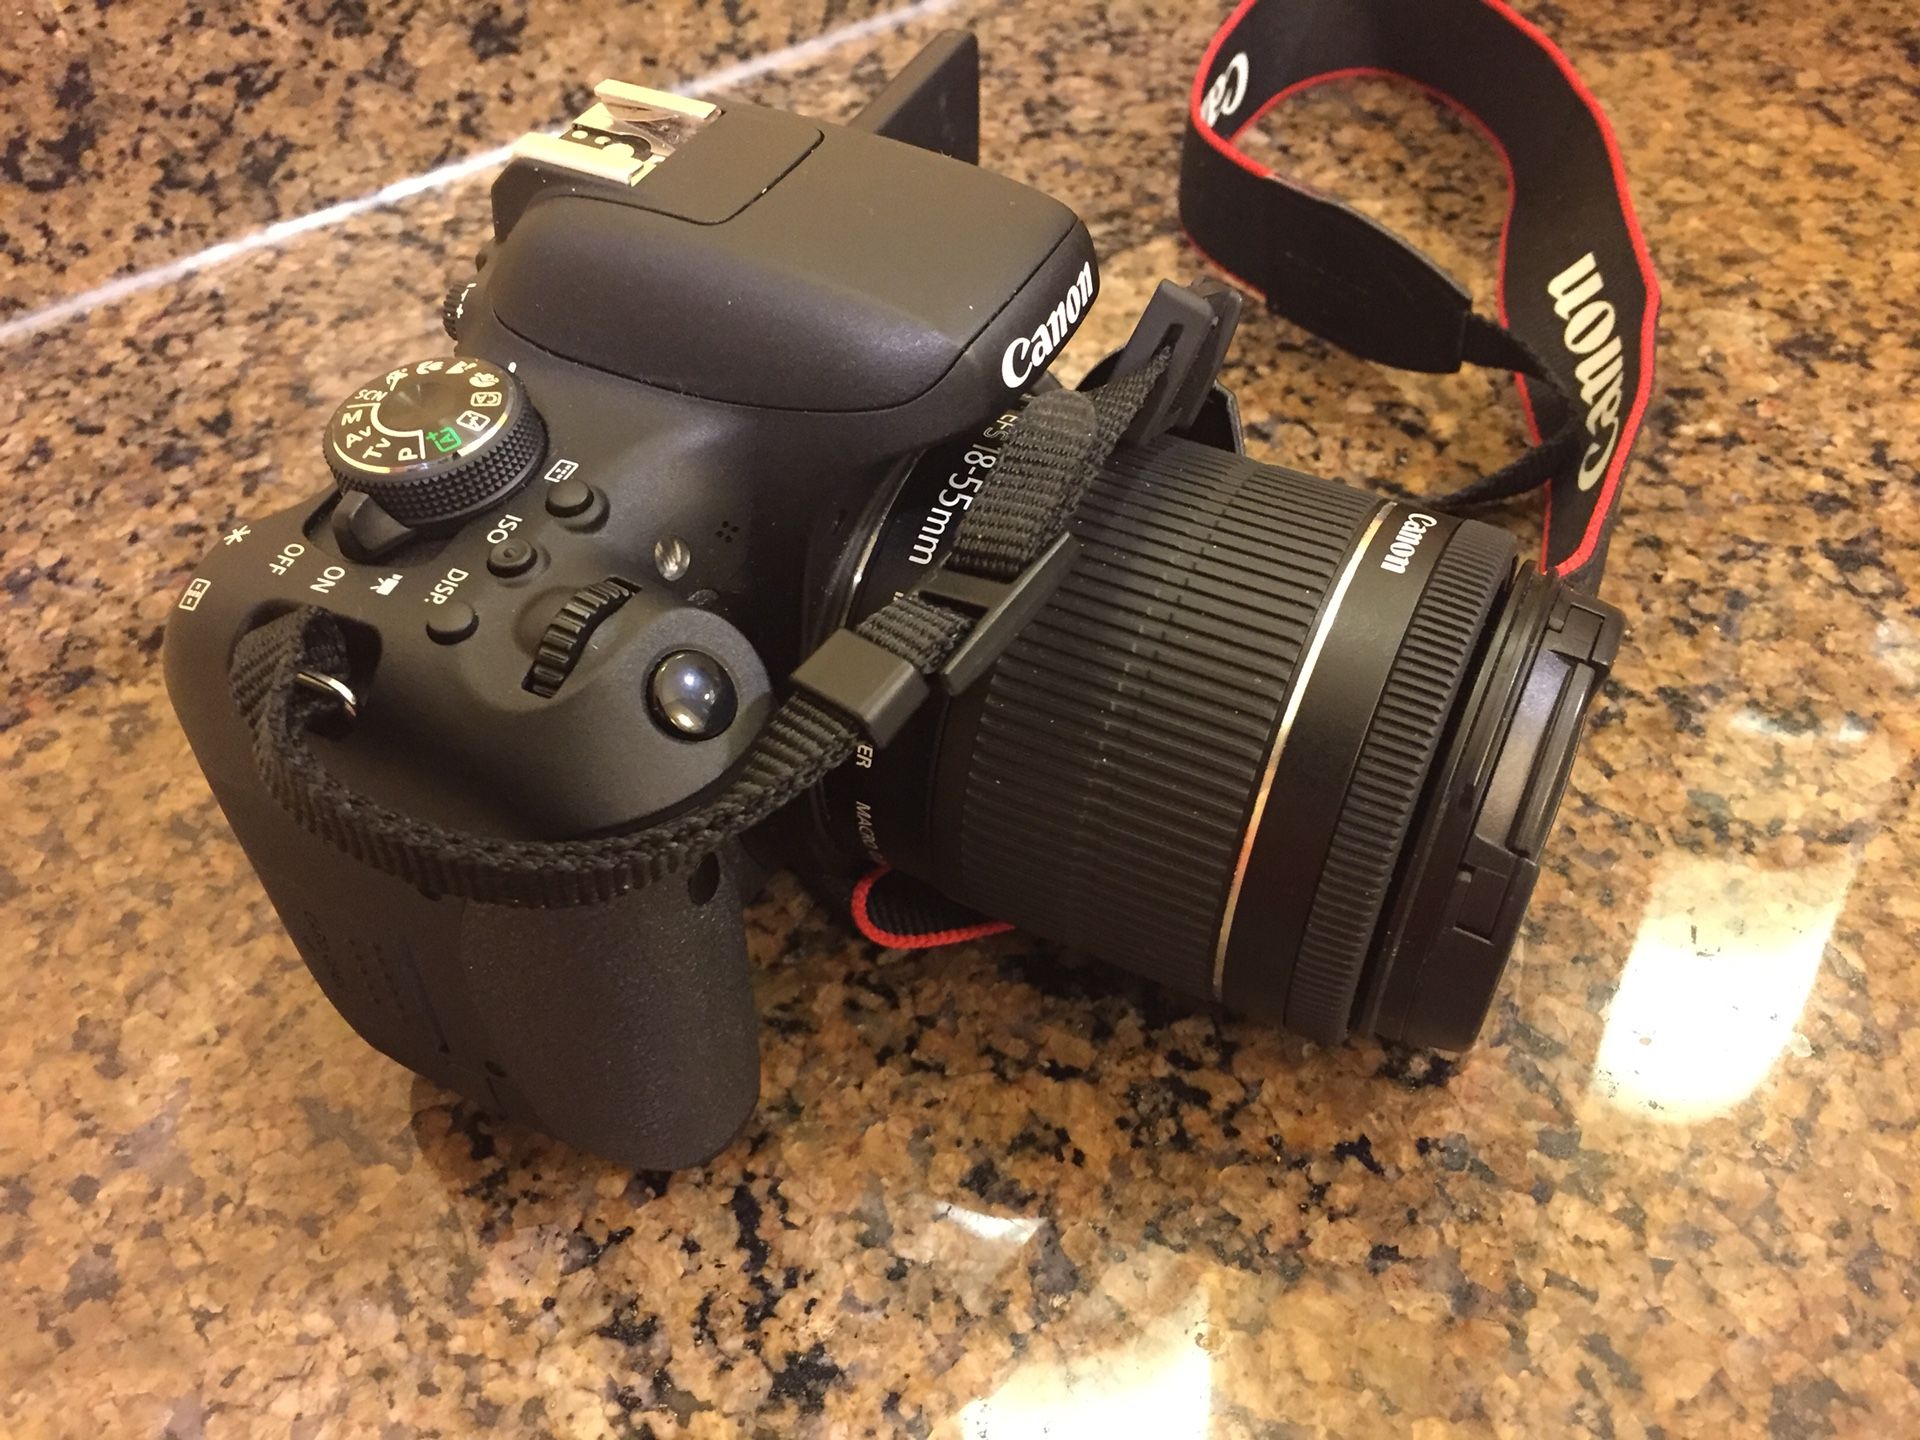 NEW Canon T6i w/ 18-55mm Lens